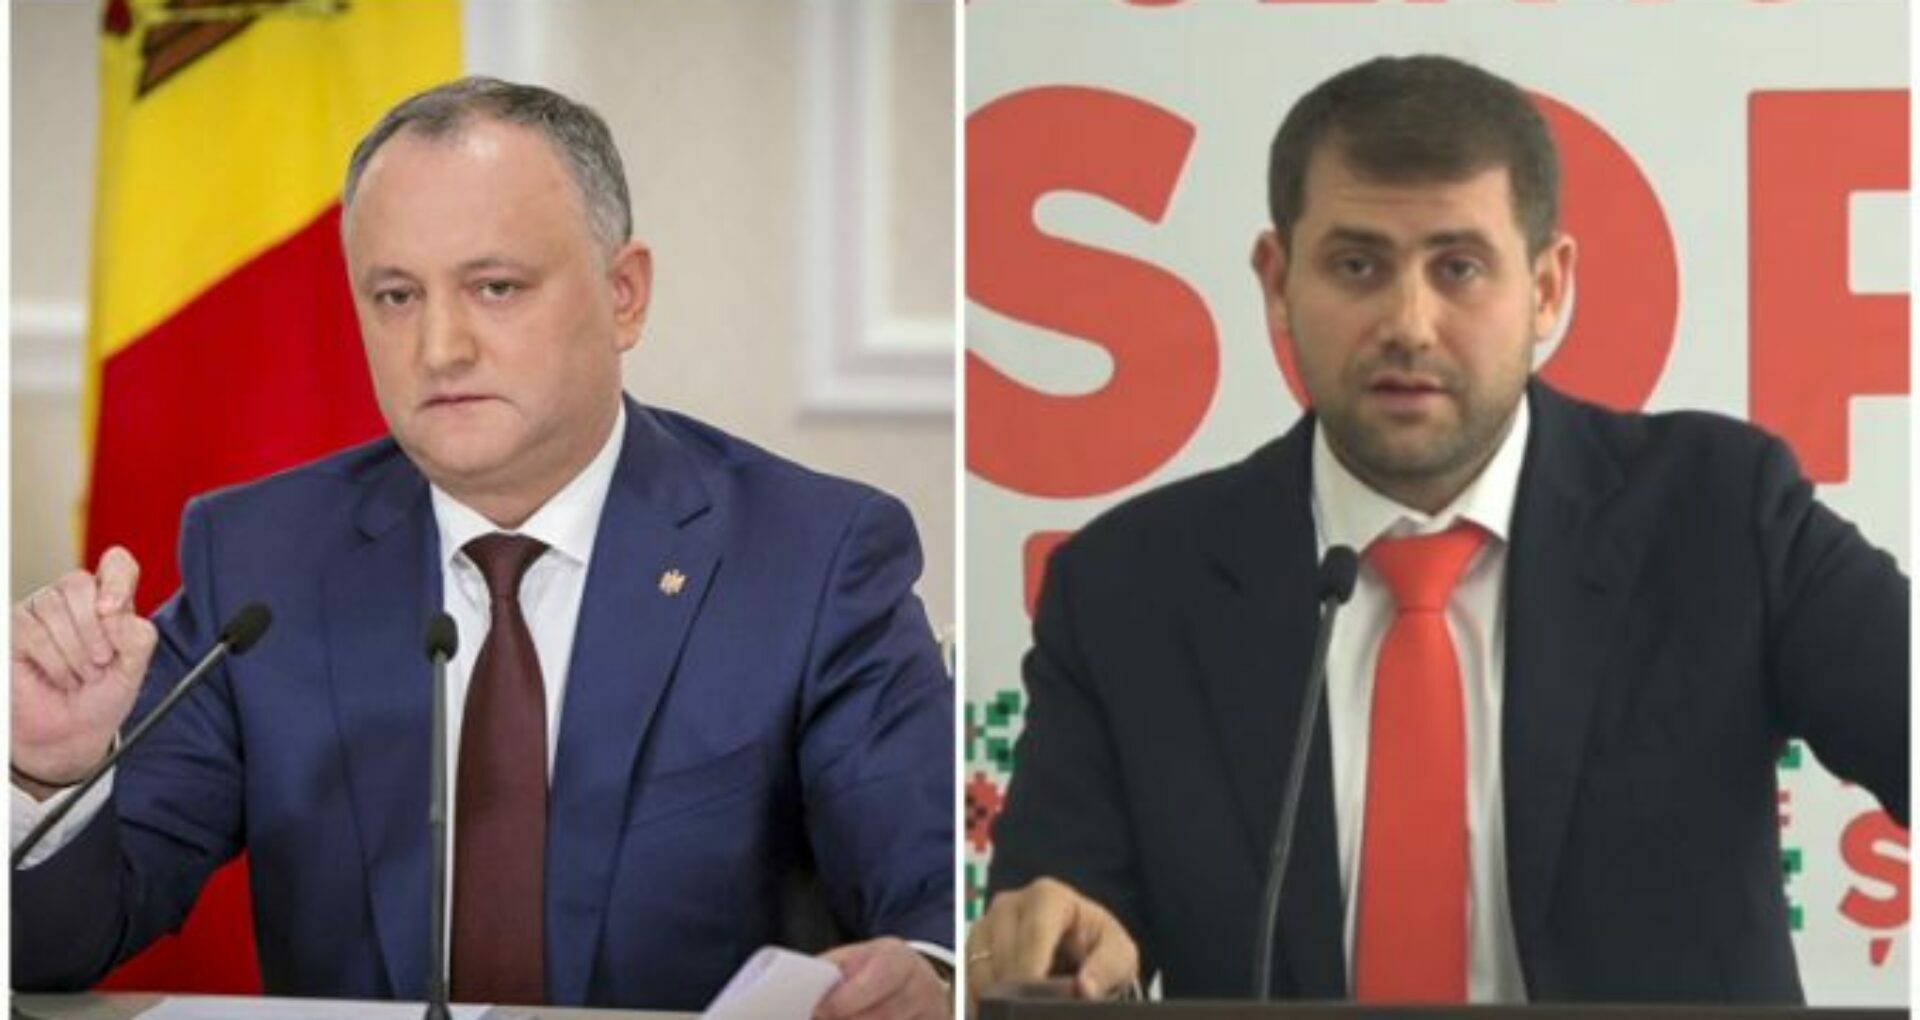 Gavrilița’s Government Rejected and New Candidates Proposed